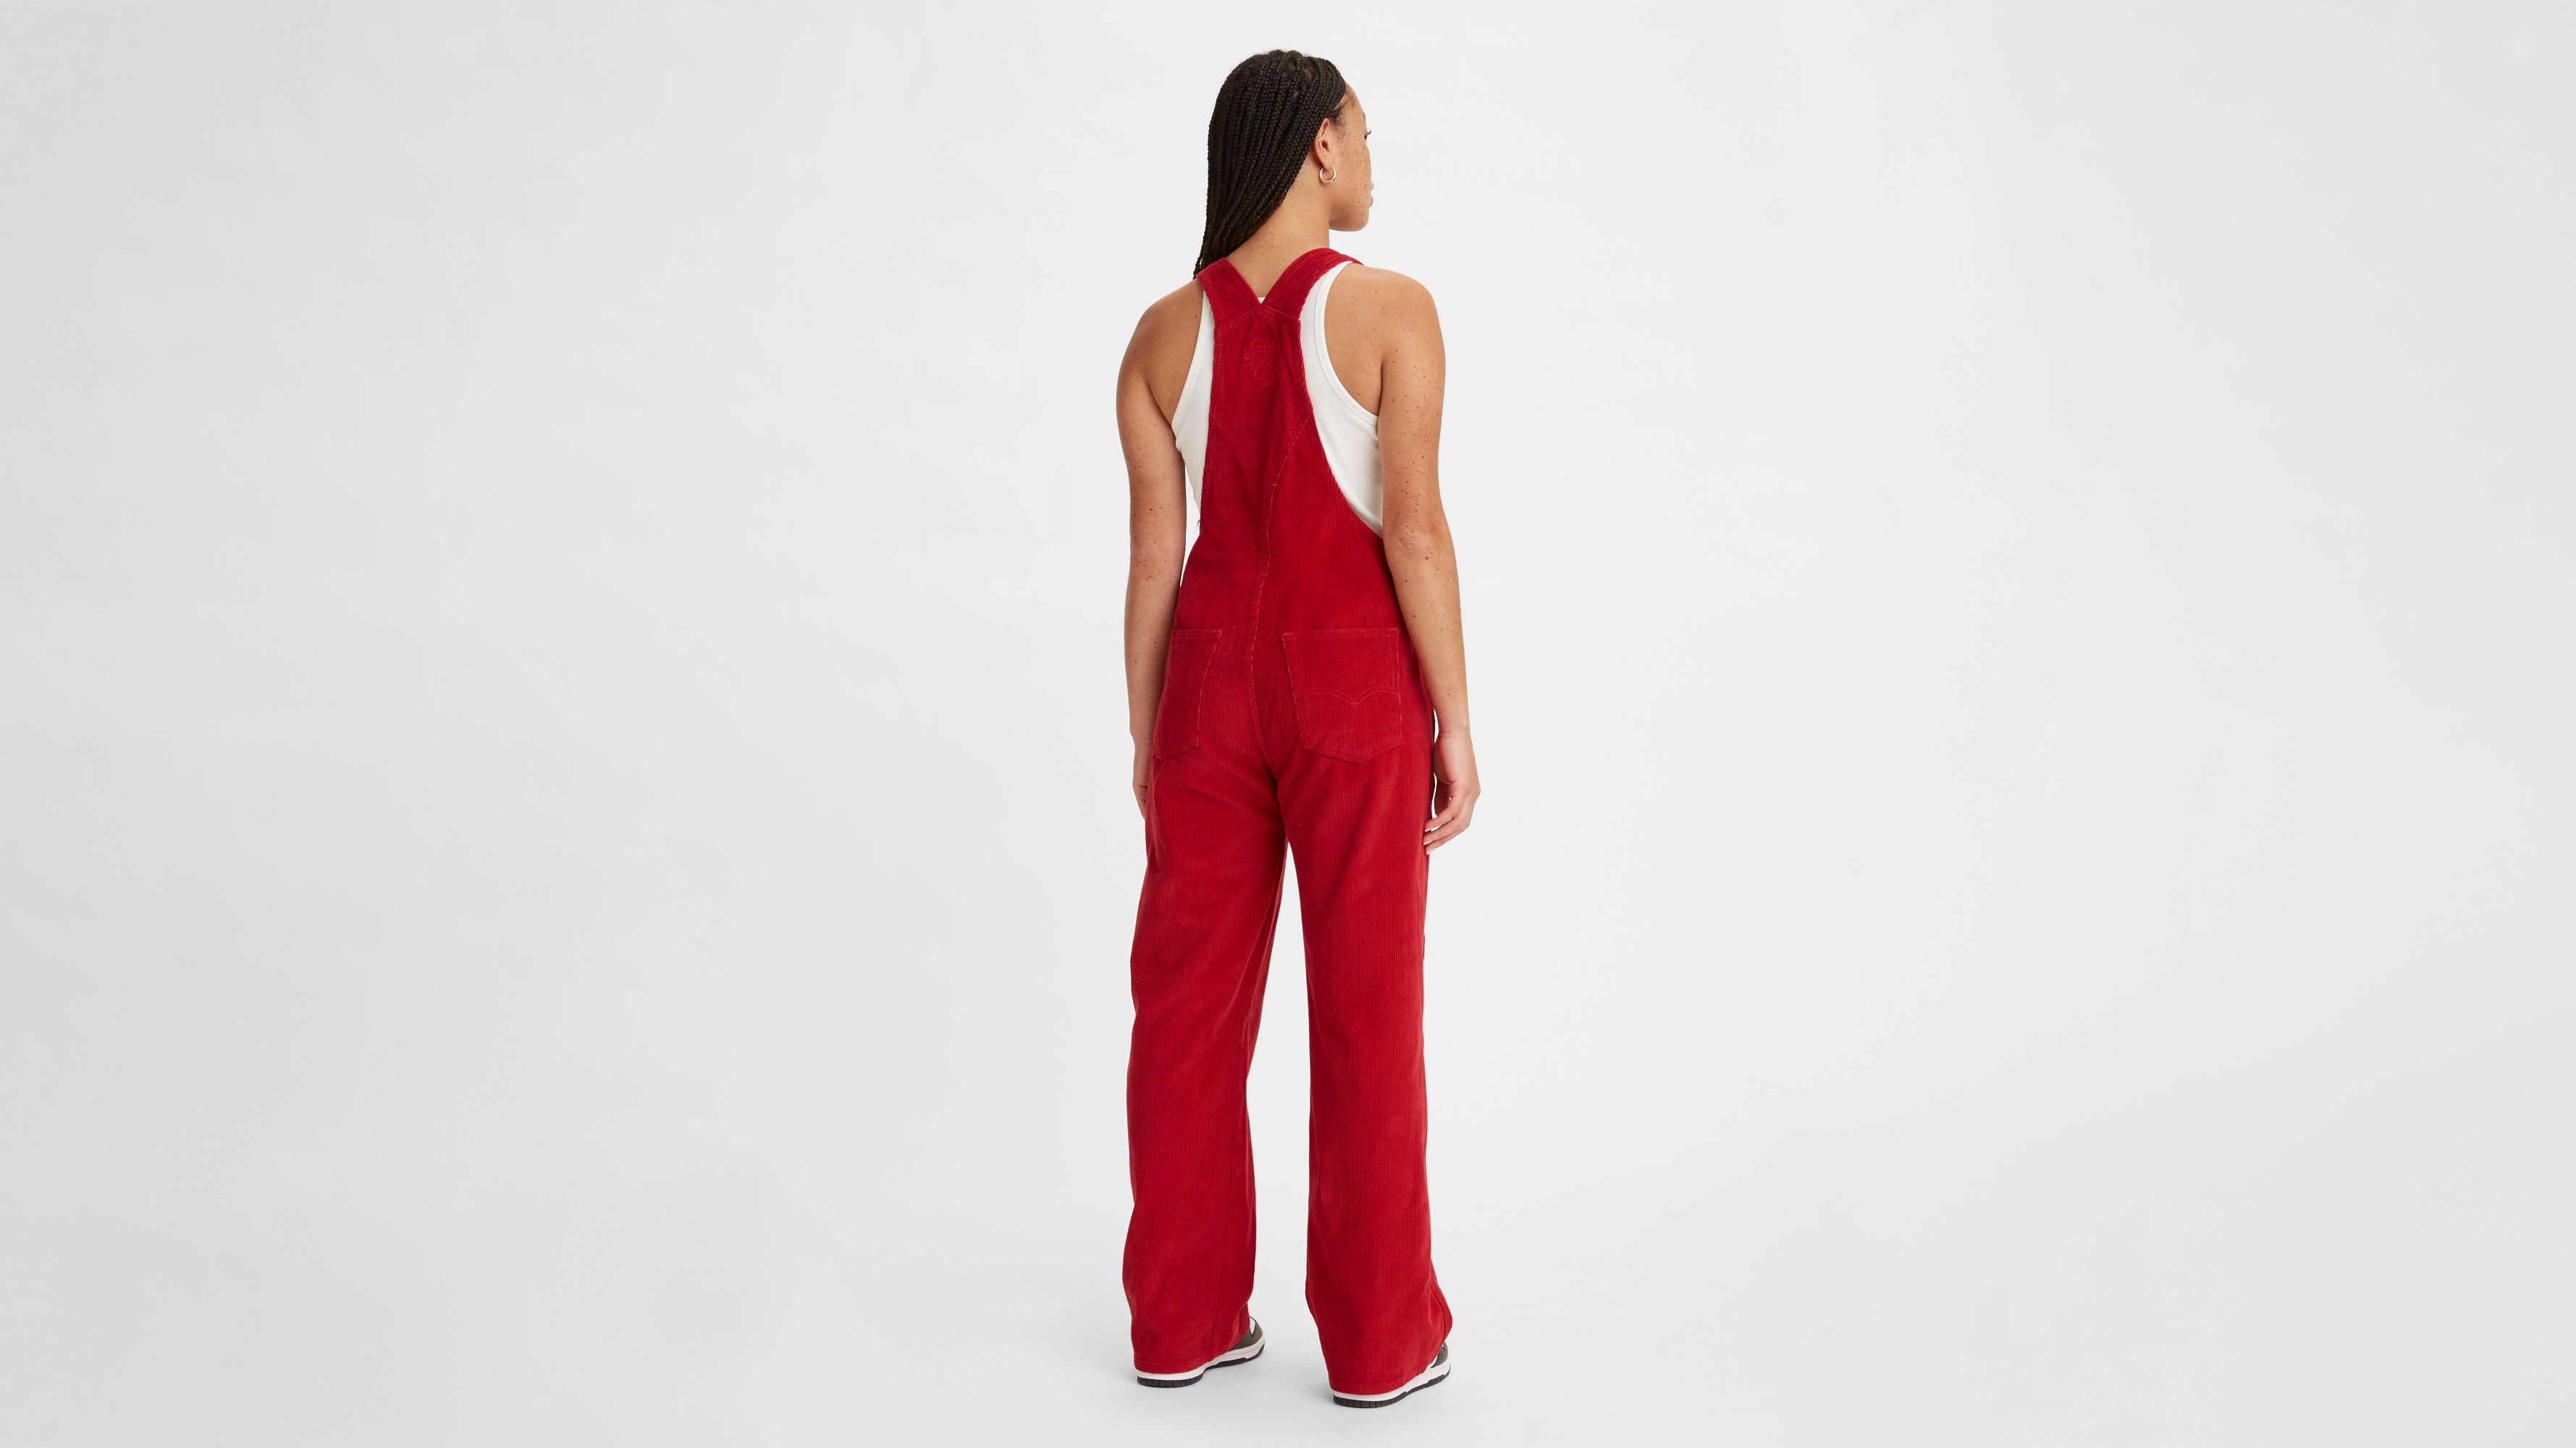 Red Jrs XL Bib OVERALL Pants Scarlet Red Dyed Upcycled No